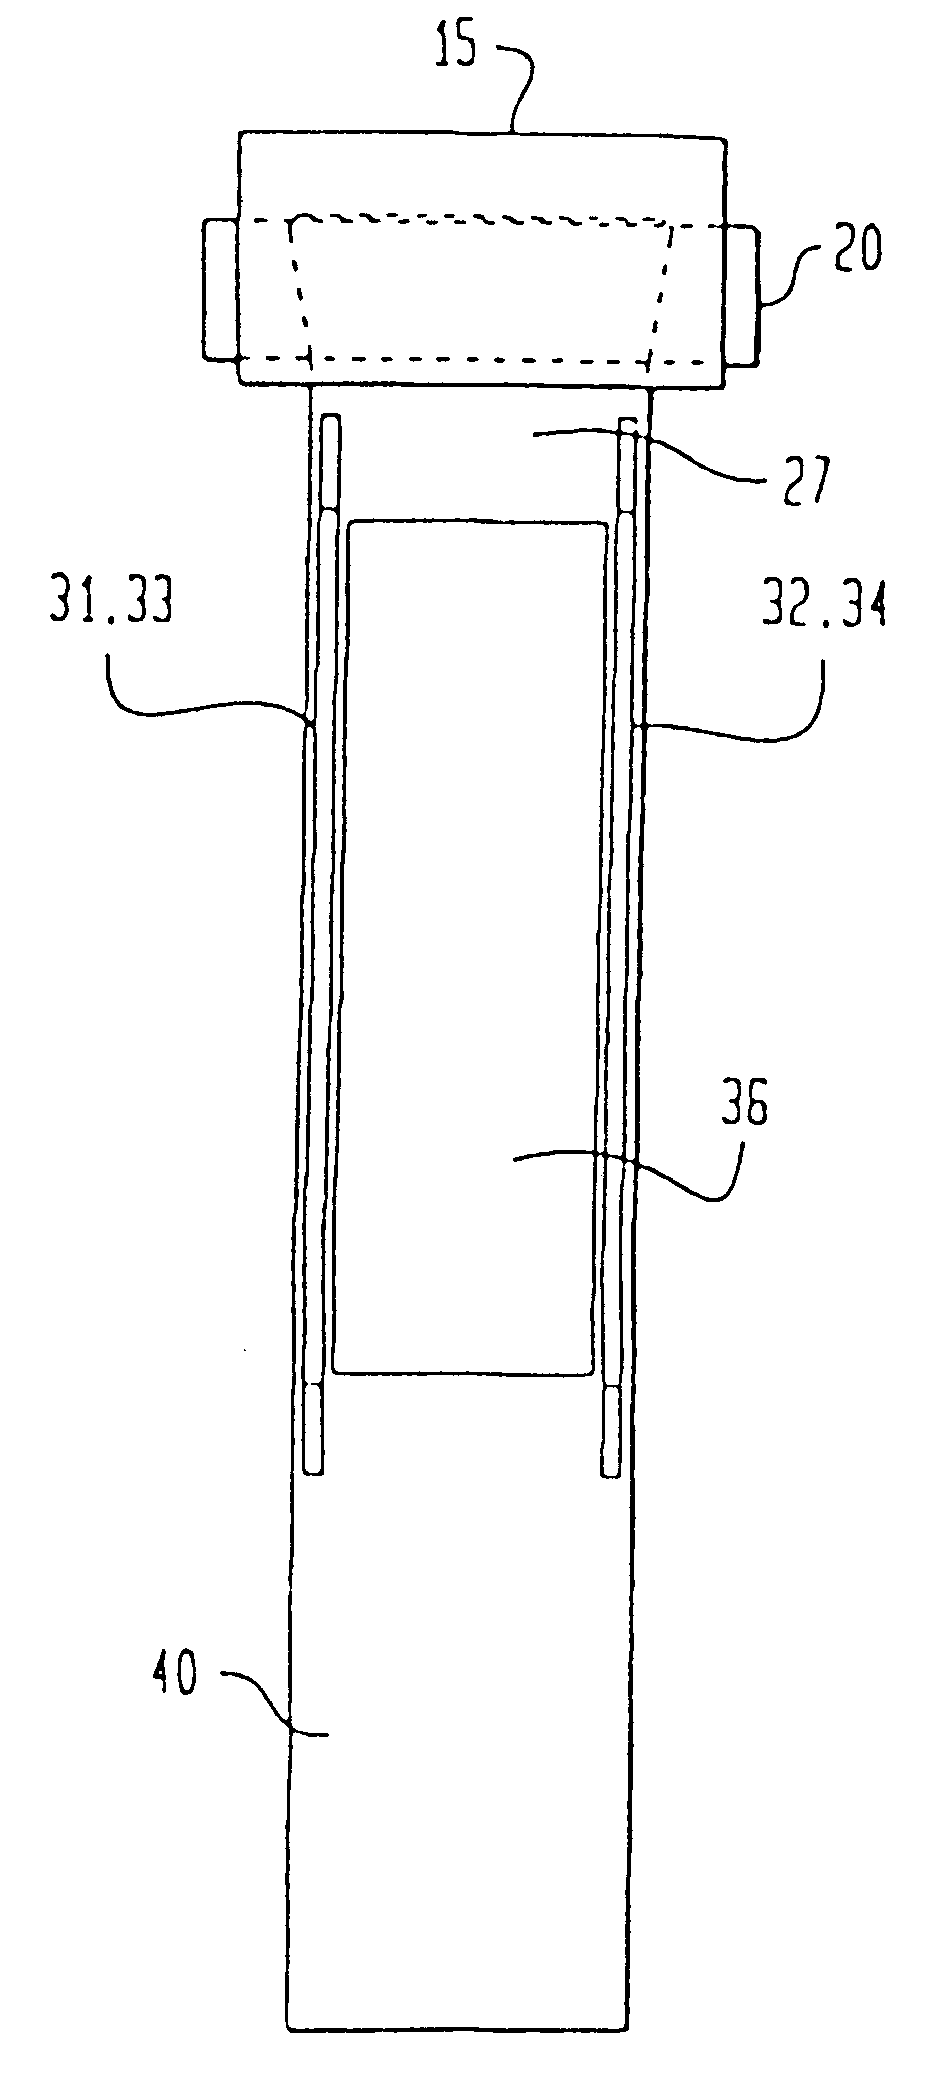 Process and apparatus for forming plastic sheet